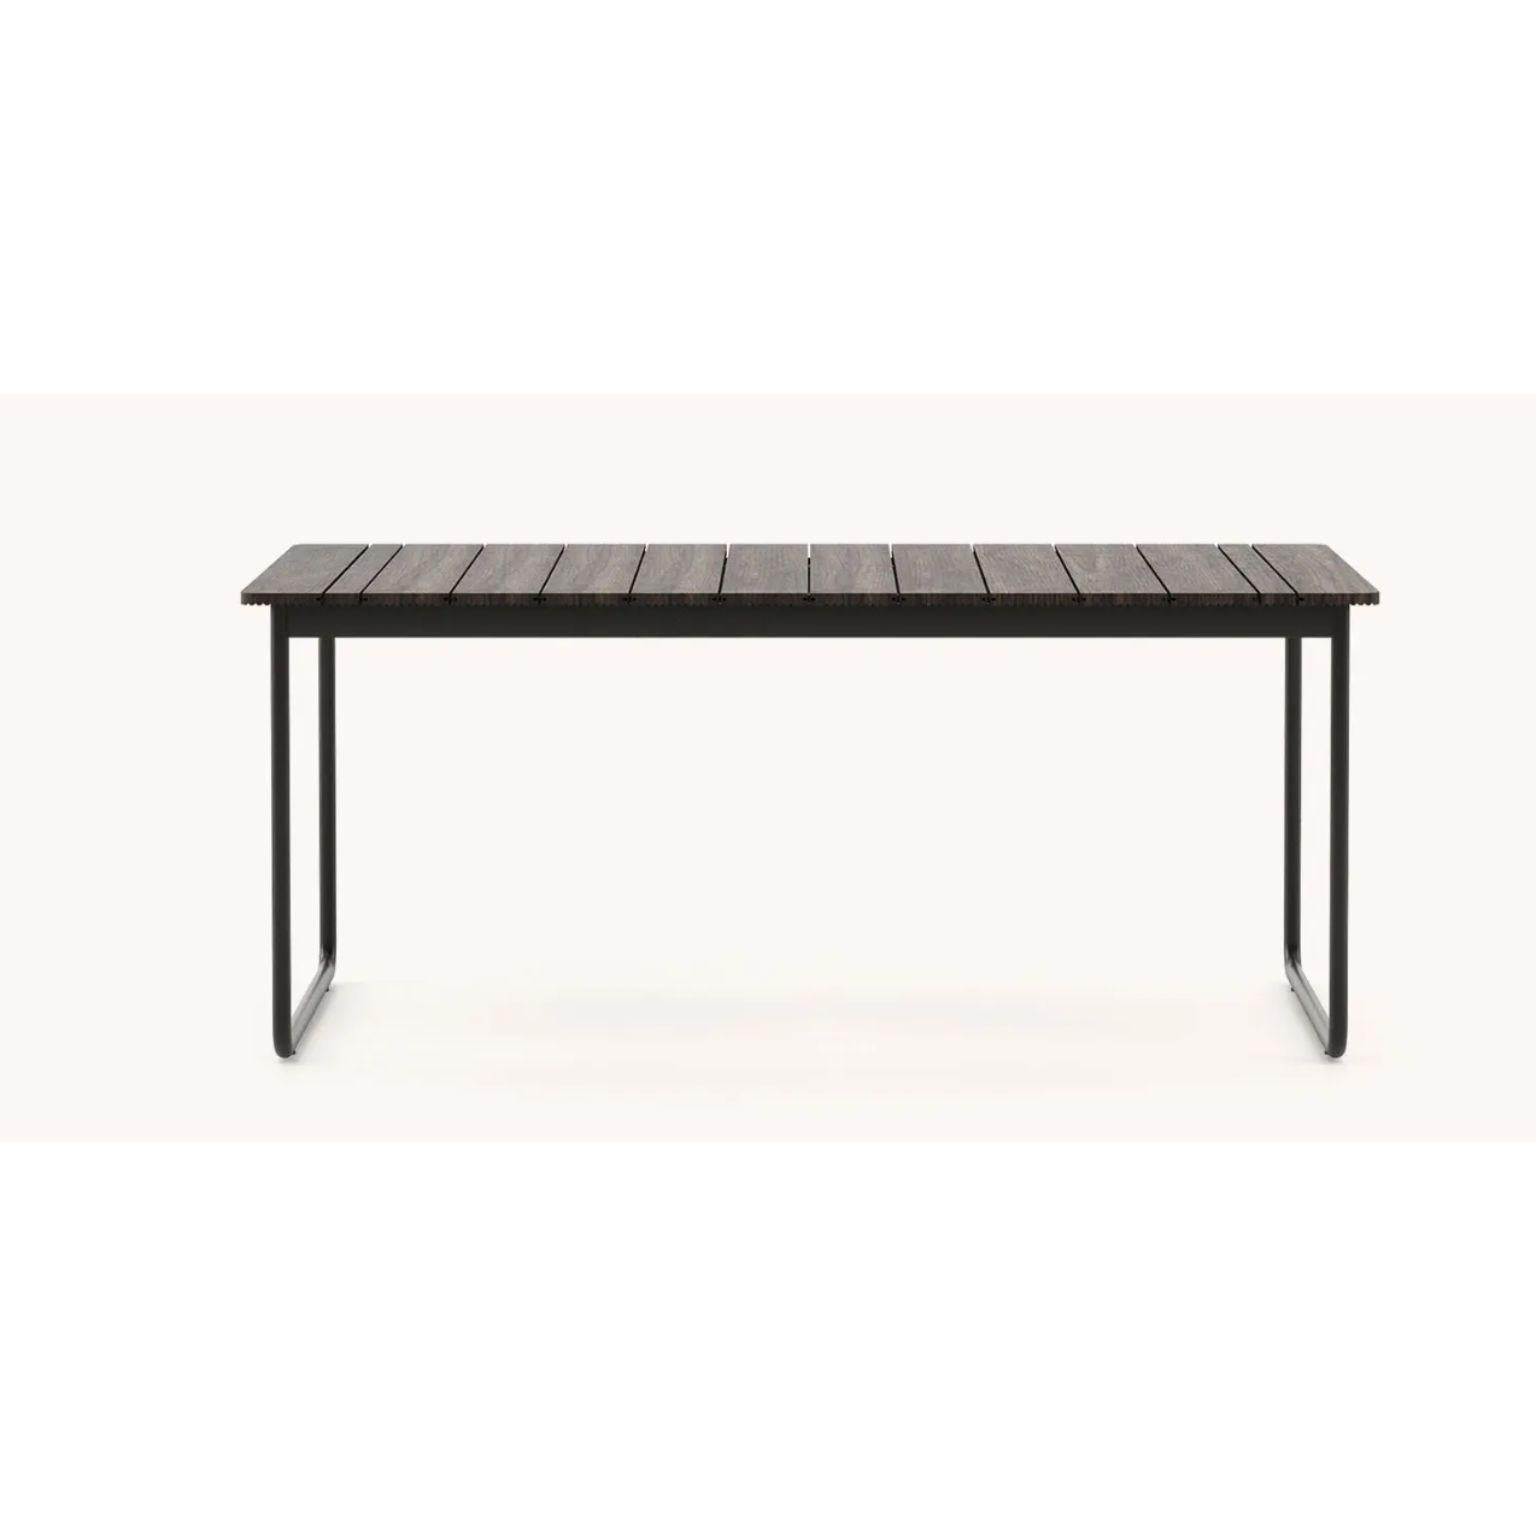 Portuguese Copacabana Dining Table by Domkapa For Sale